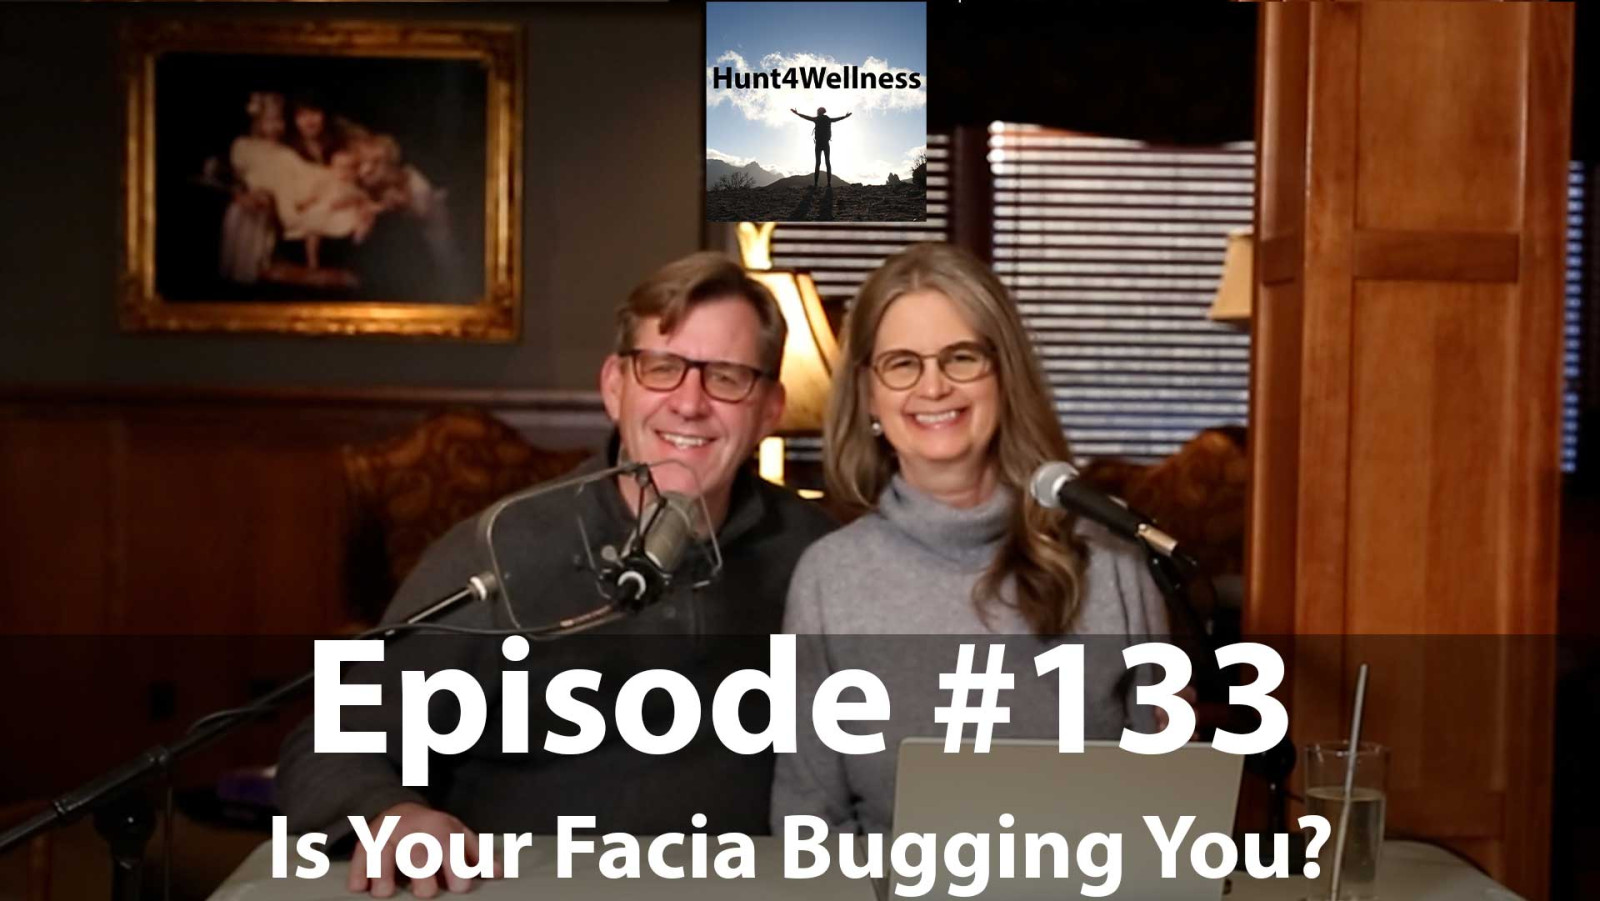 Episode #133 - Is Your Facia Bugging You?